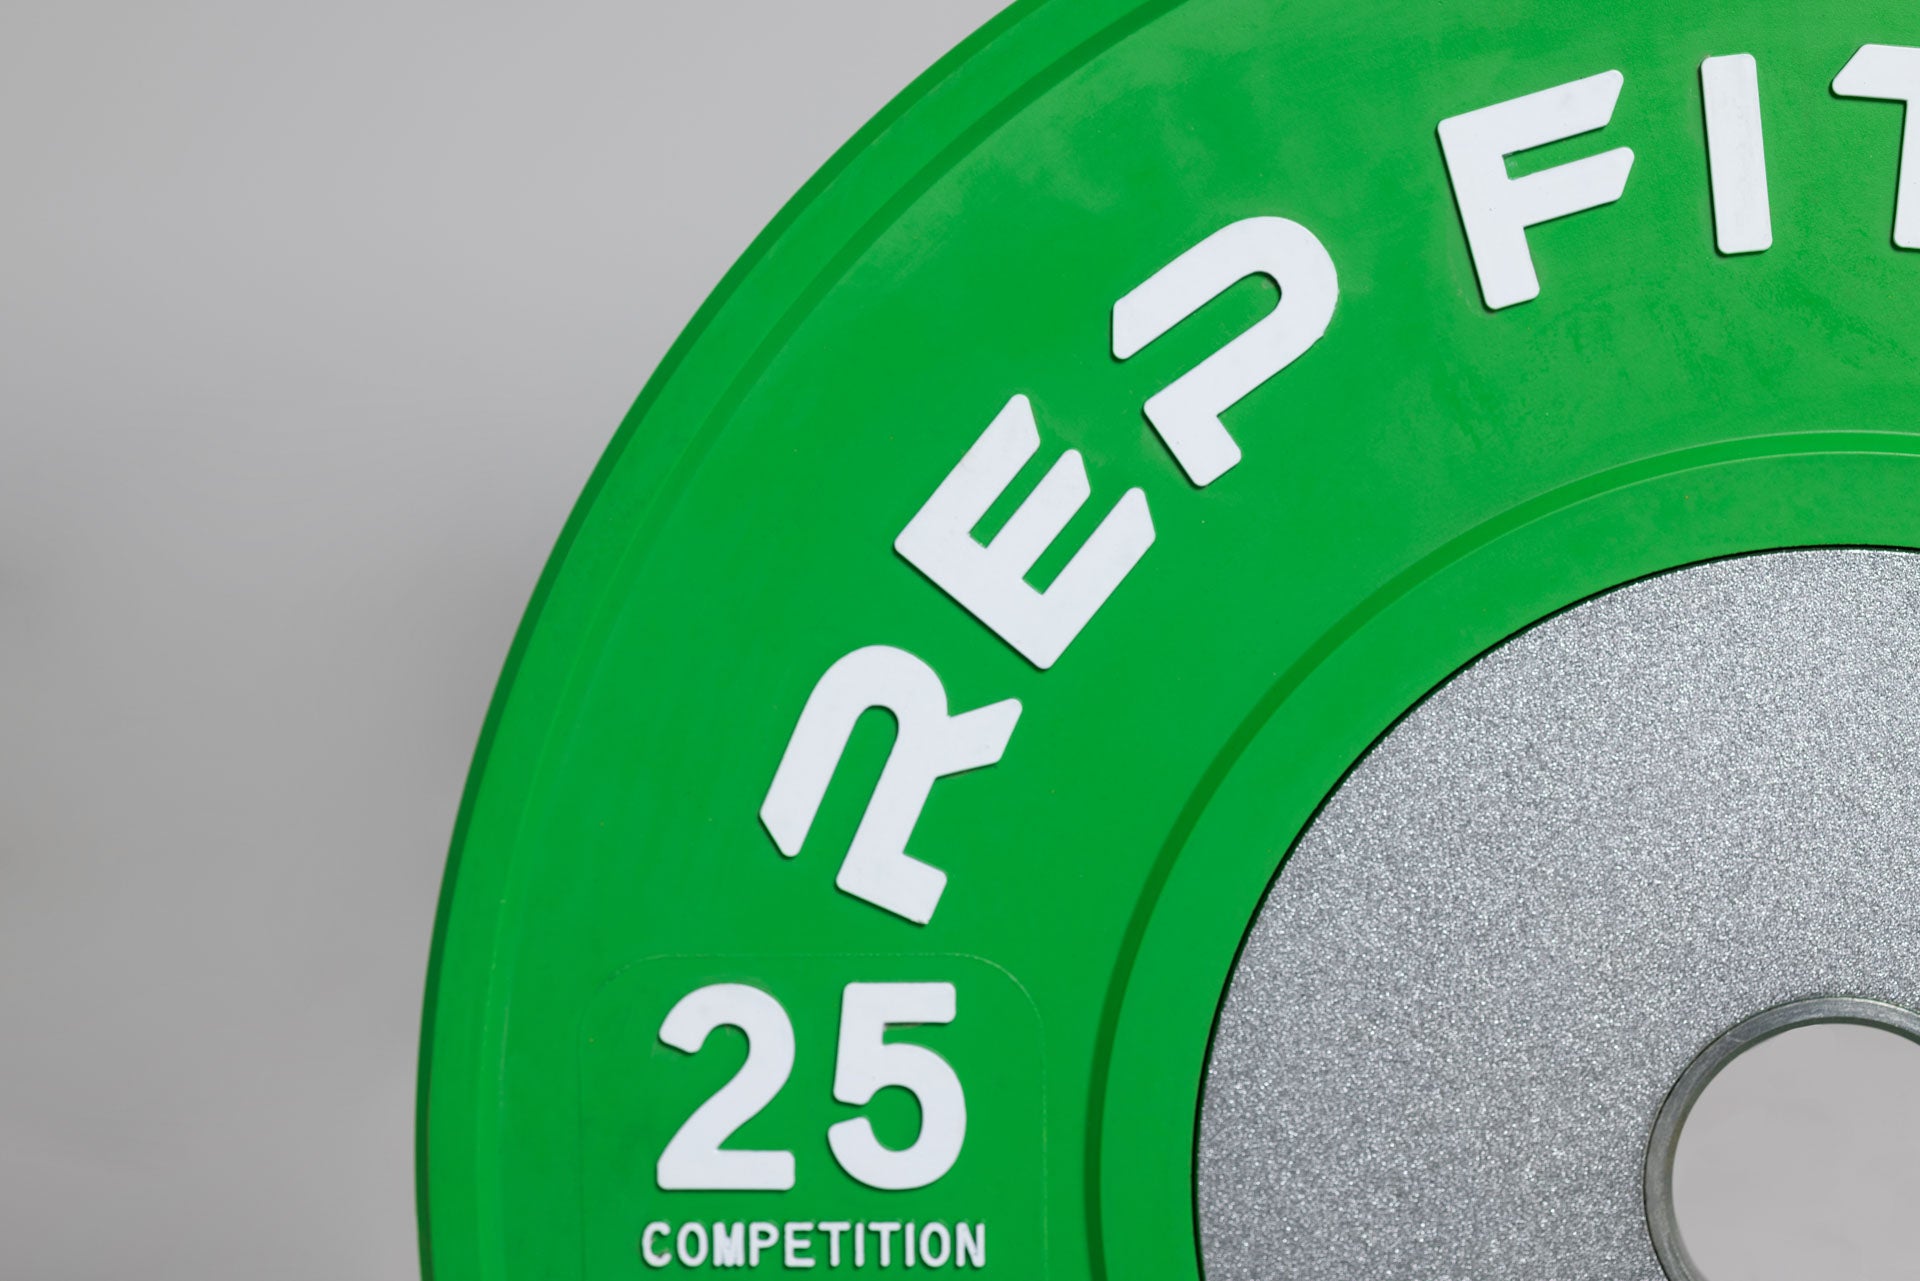 Close-up view of a green 25lb competition bumper plate showing zinc-coated steel disc insert and raised white 